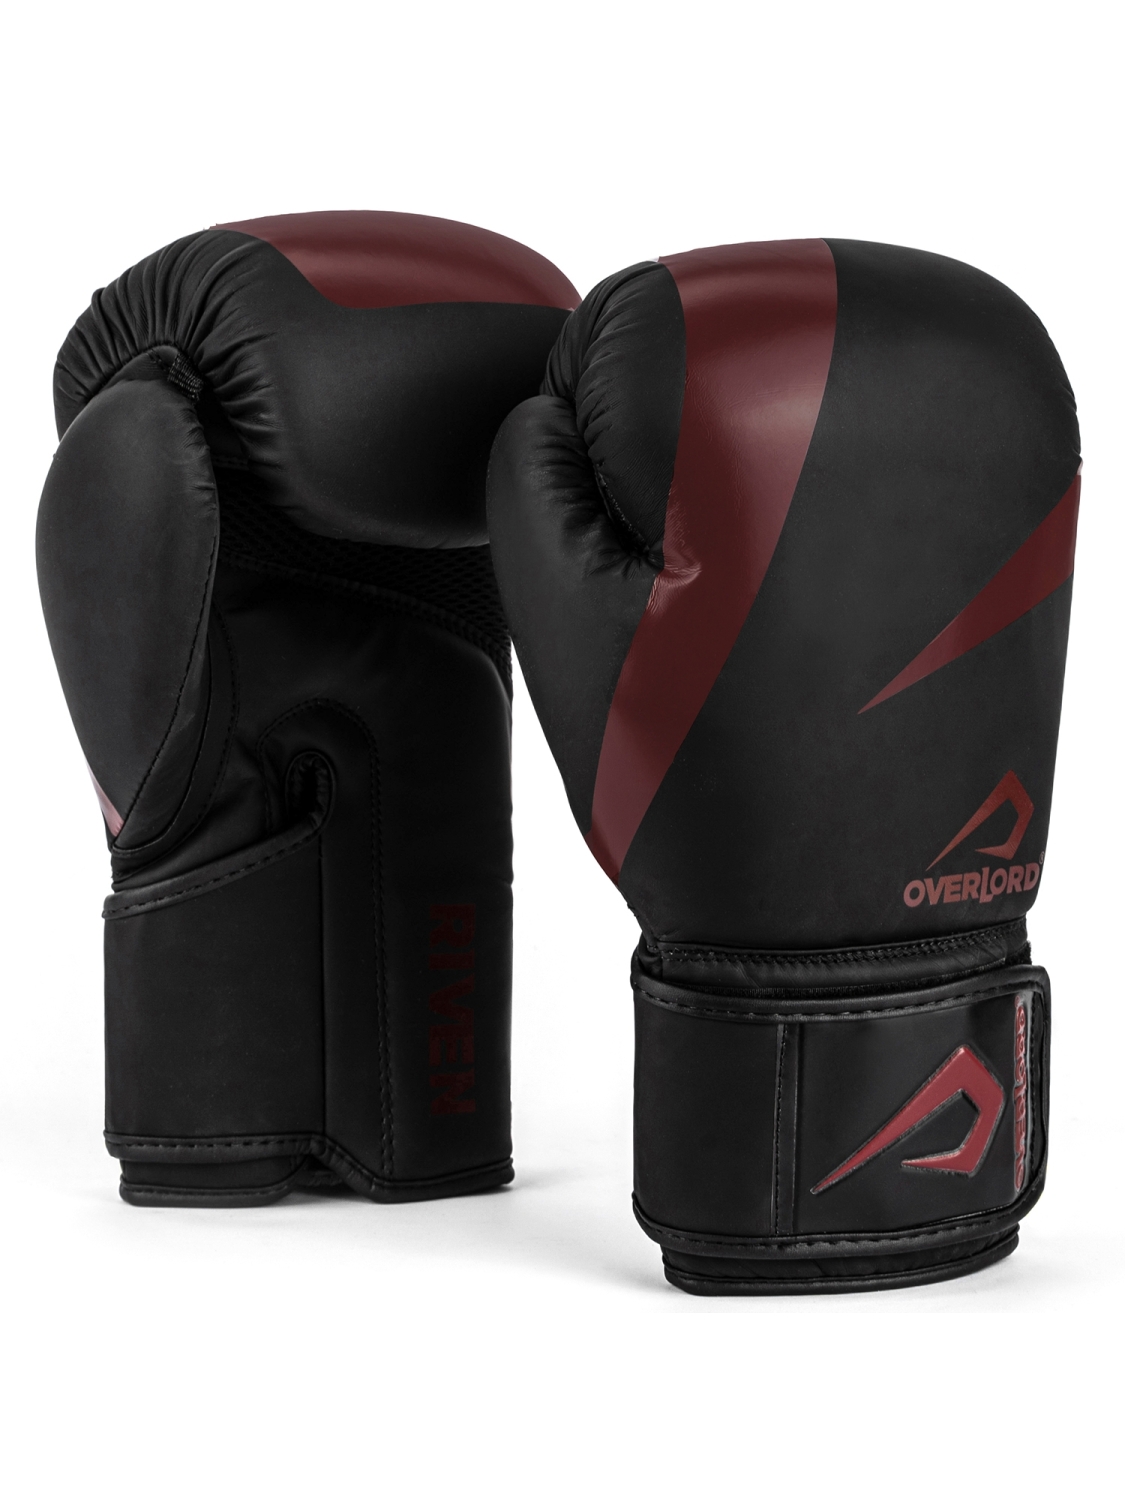 Overlord Boxing Gloves Riven DX Leather